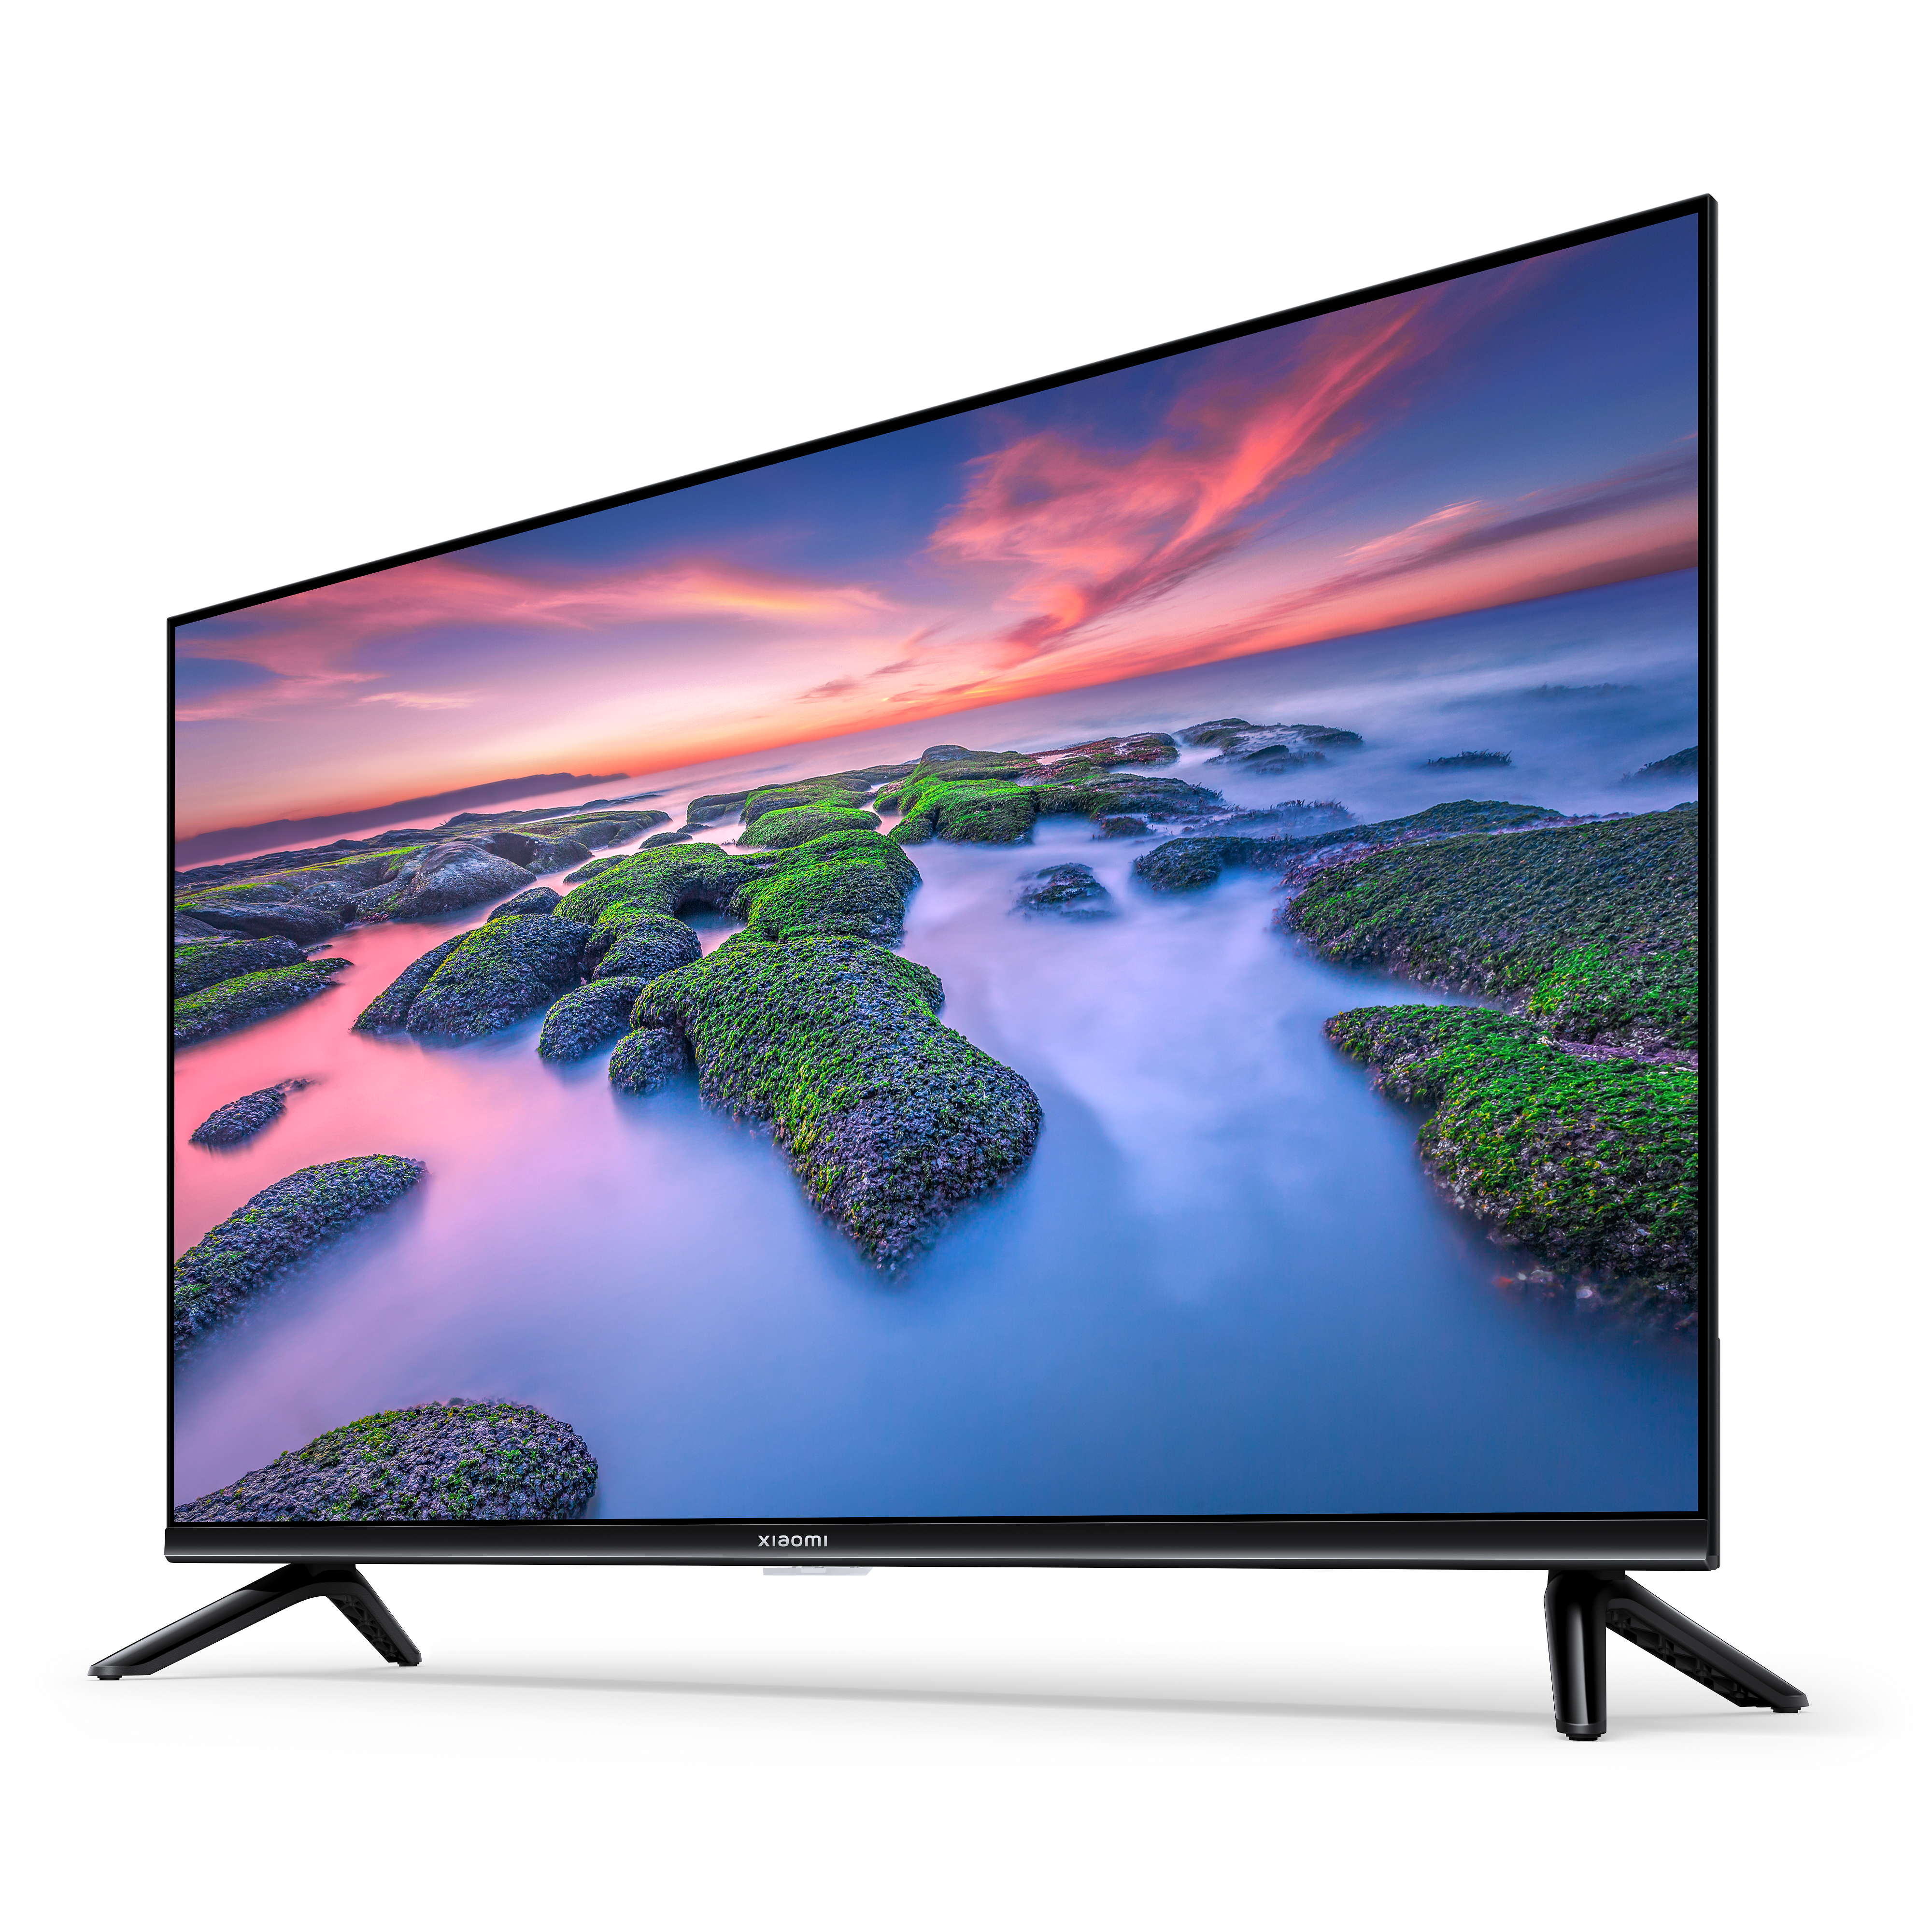 SMART TV Zoll Android TV A2 HD, 10) 32\